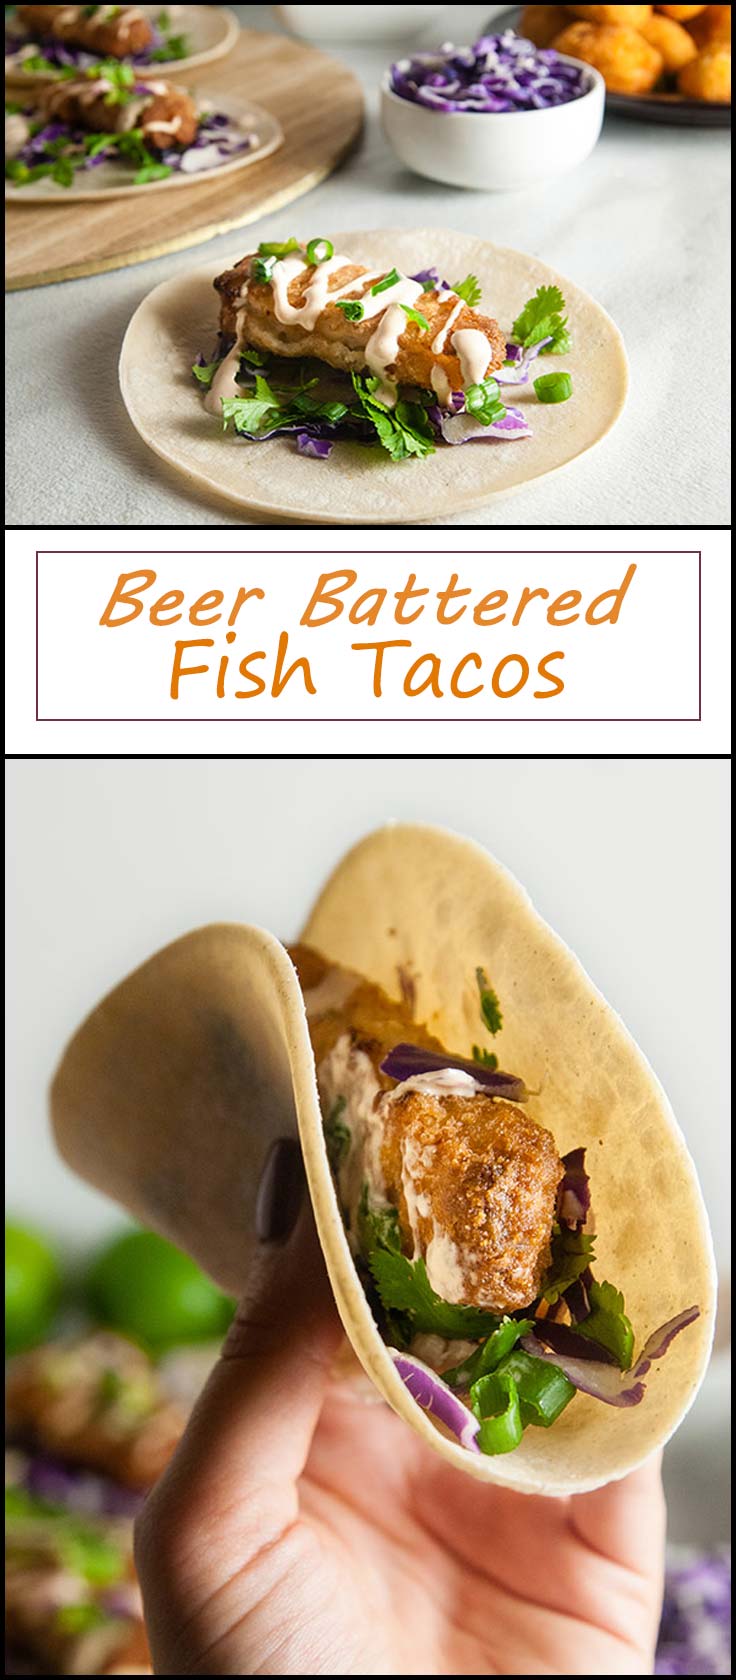 Perfect for busy weeknight dinners Quick and Easy Beer Battered Fish Tacos with Chipotle Lime Crema from www.seasonedsprinkles.com